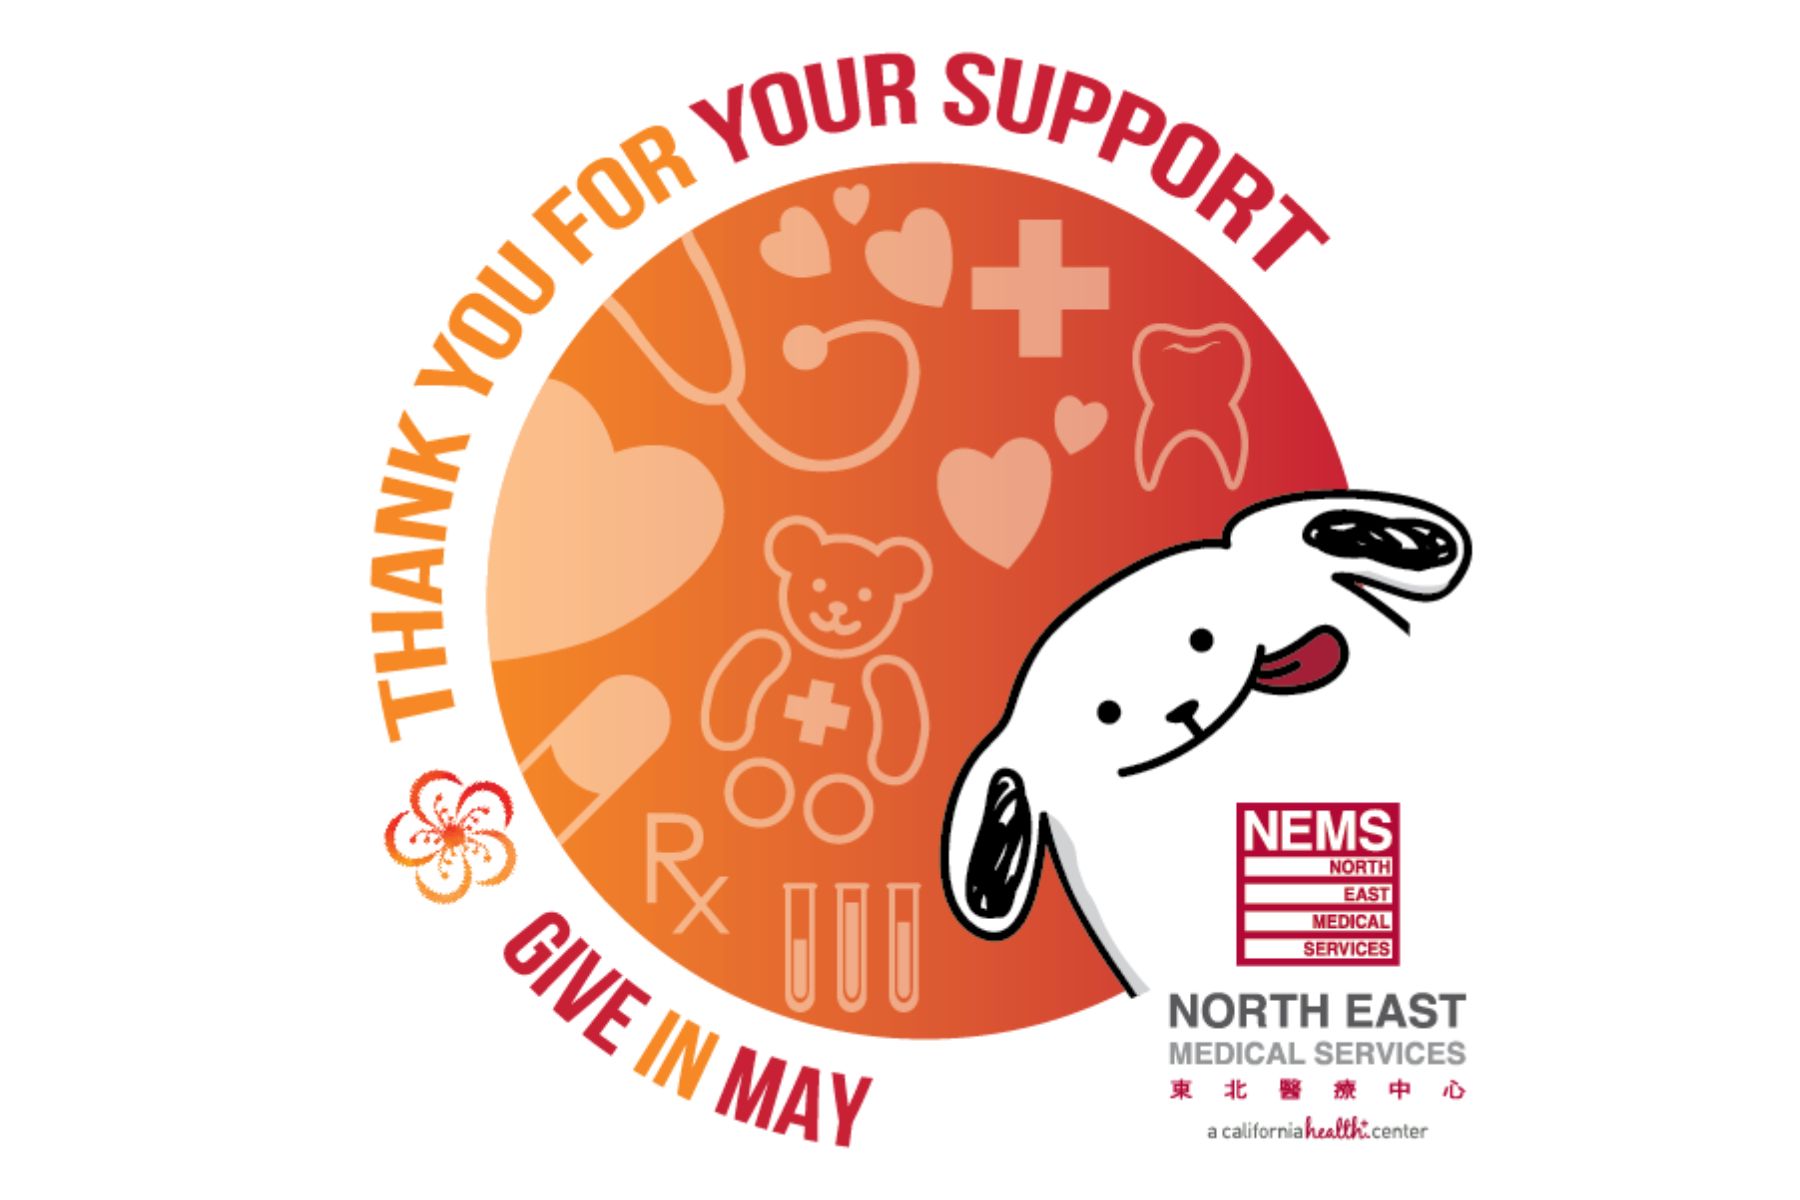 Support NEMS Through The Give In May Fundraising Campaign!